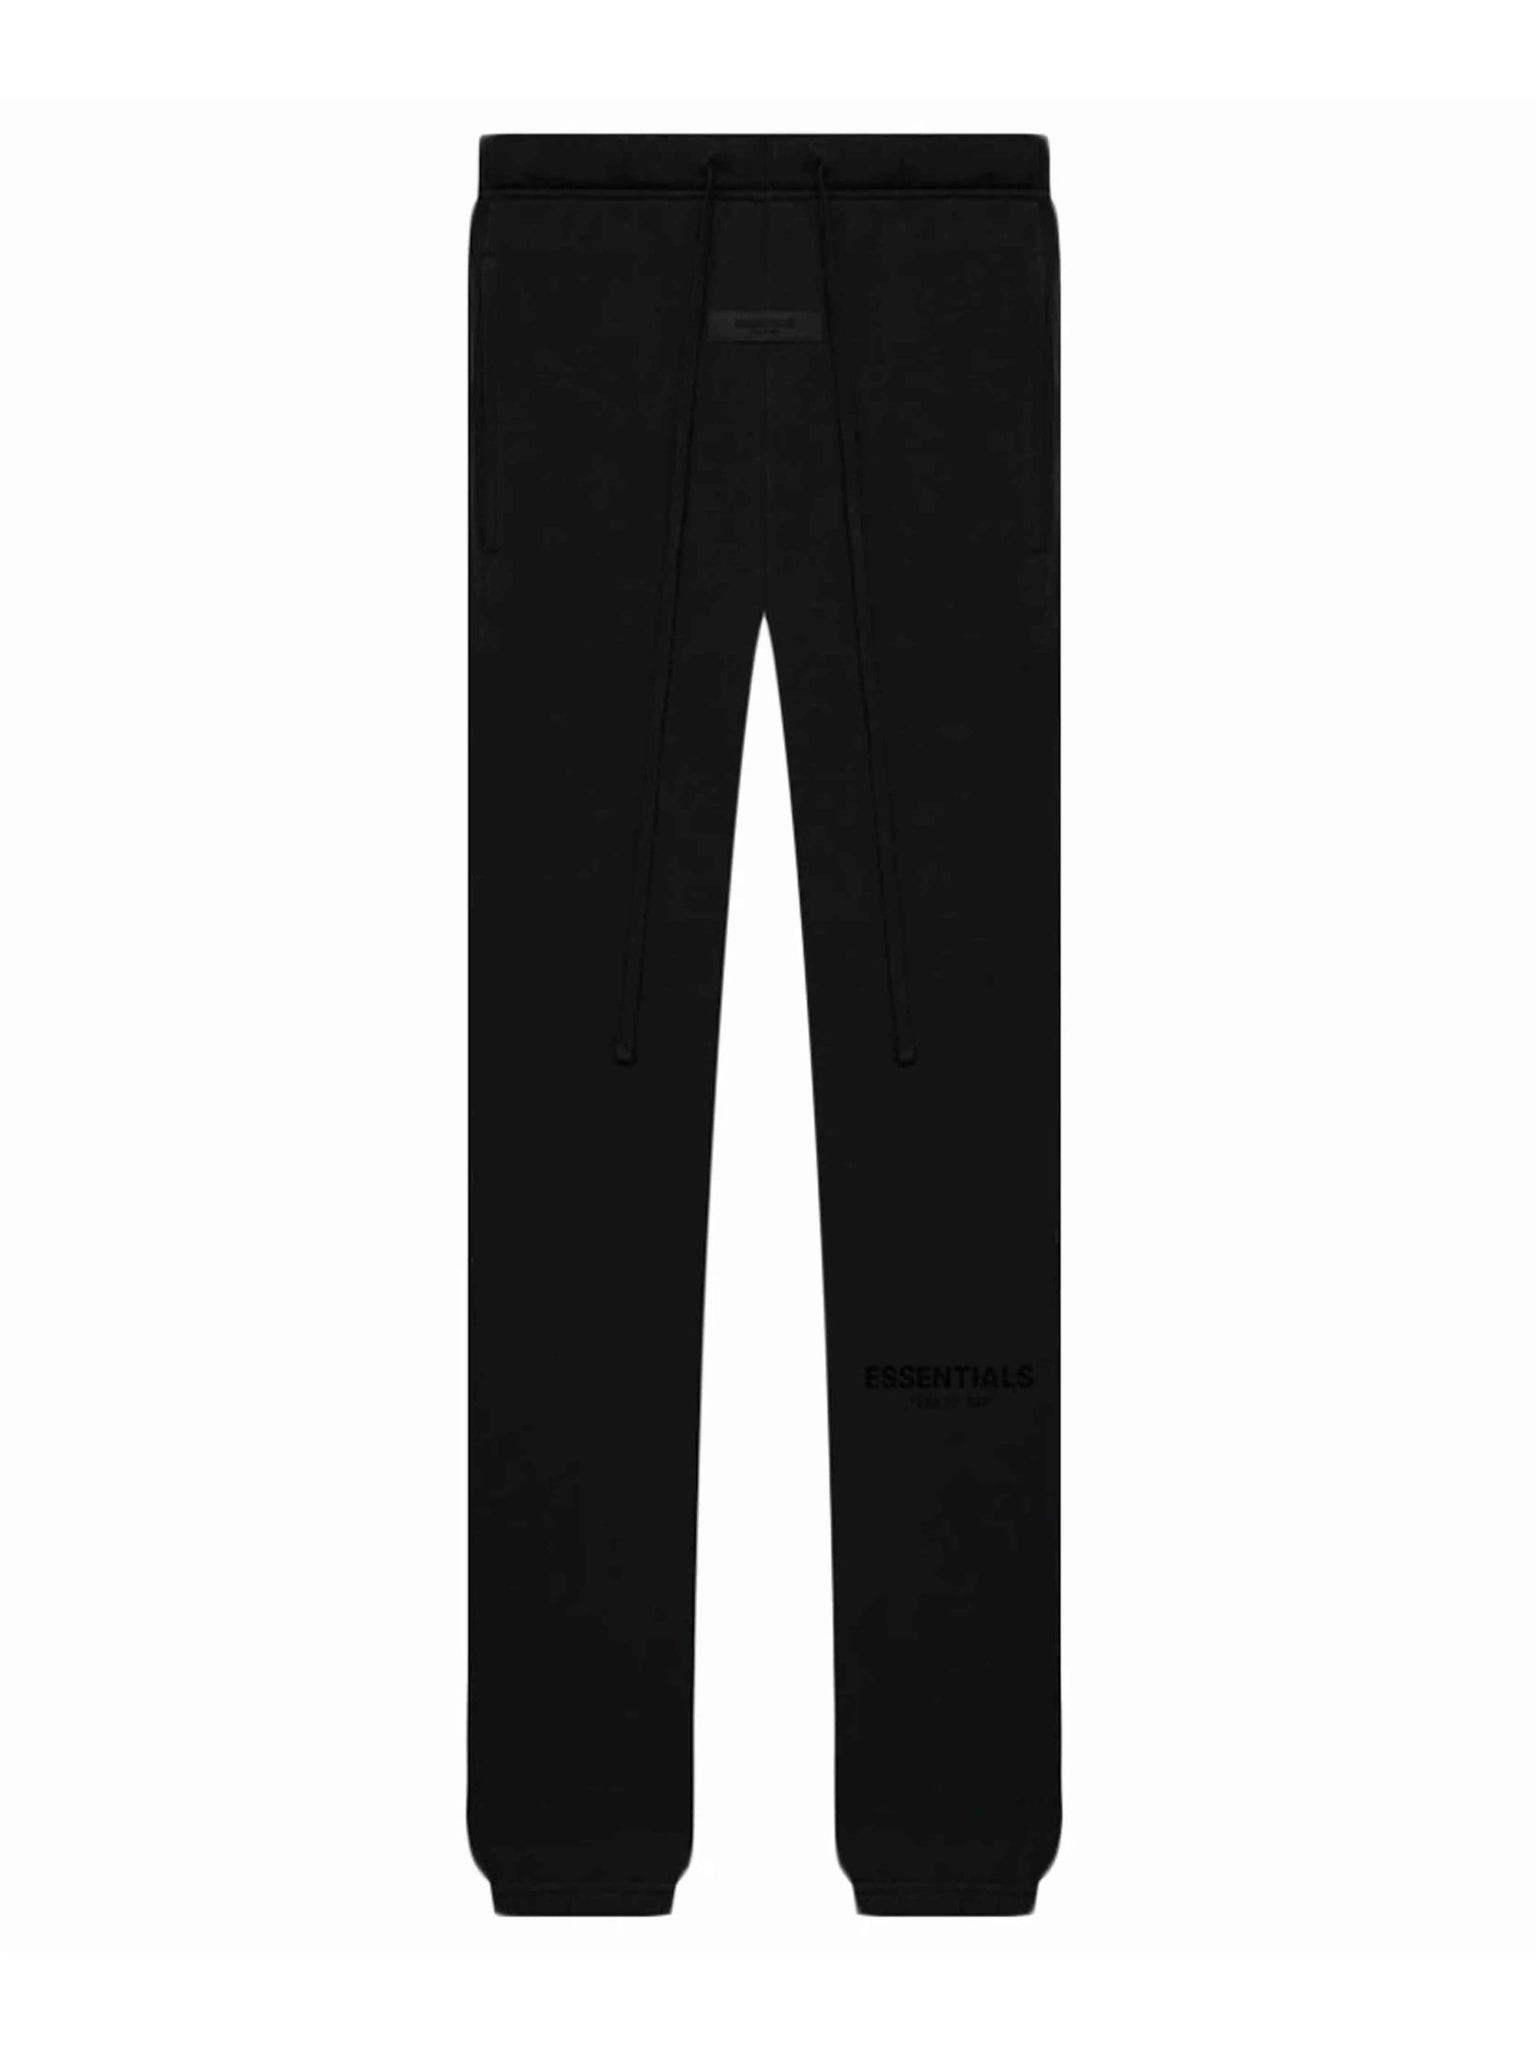 Fear of God Essentials Sweatpants Stretch Limo [SS22] Fear Of God Essentials